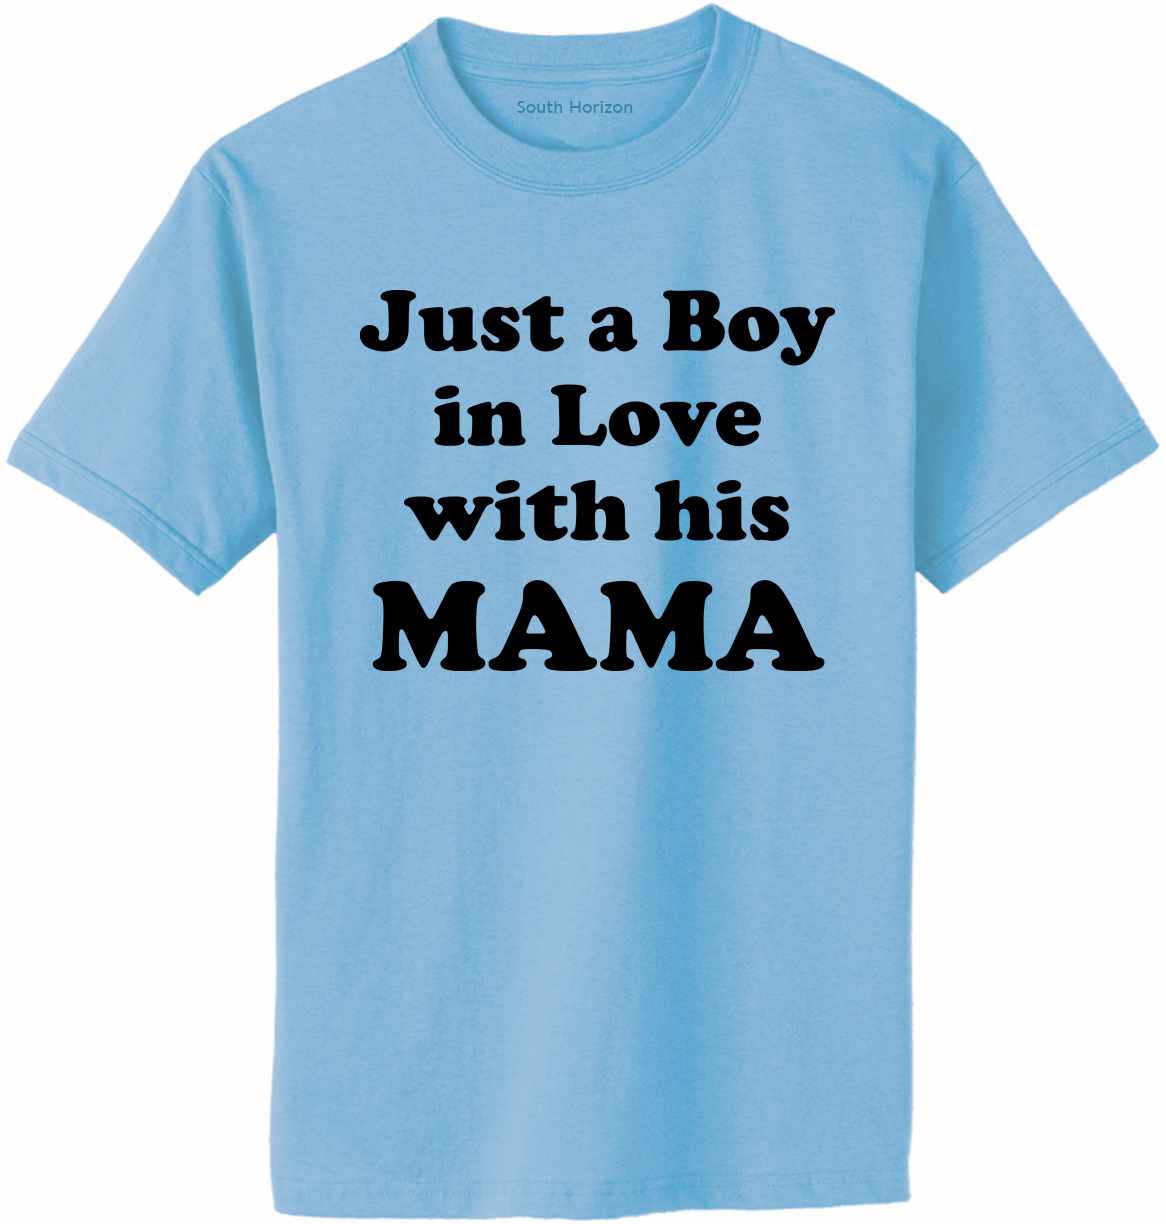 Just a Boy in Love with his MAMA Adult T-Shirt (#1097-1)